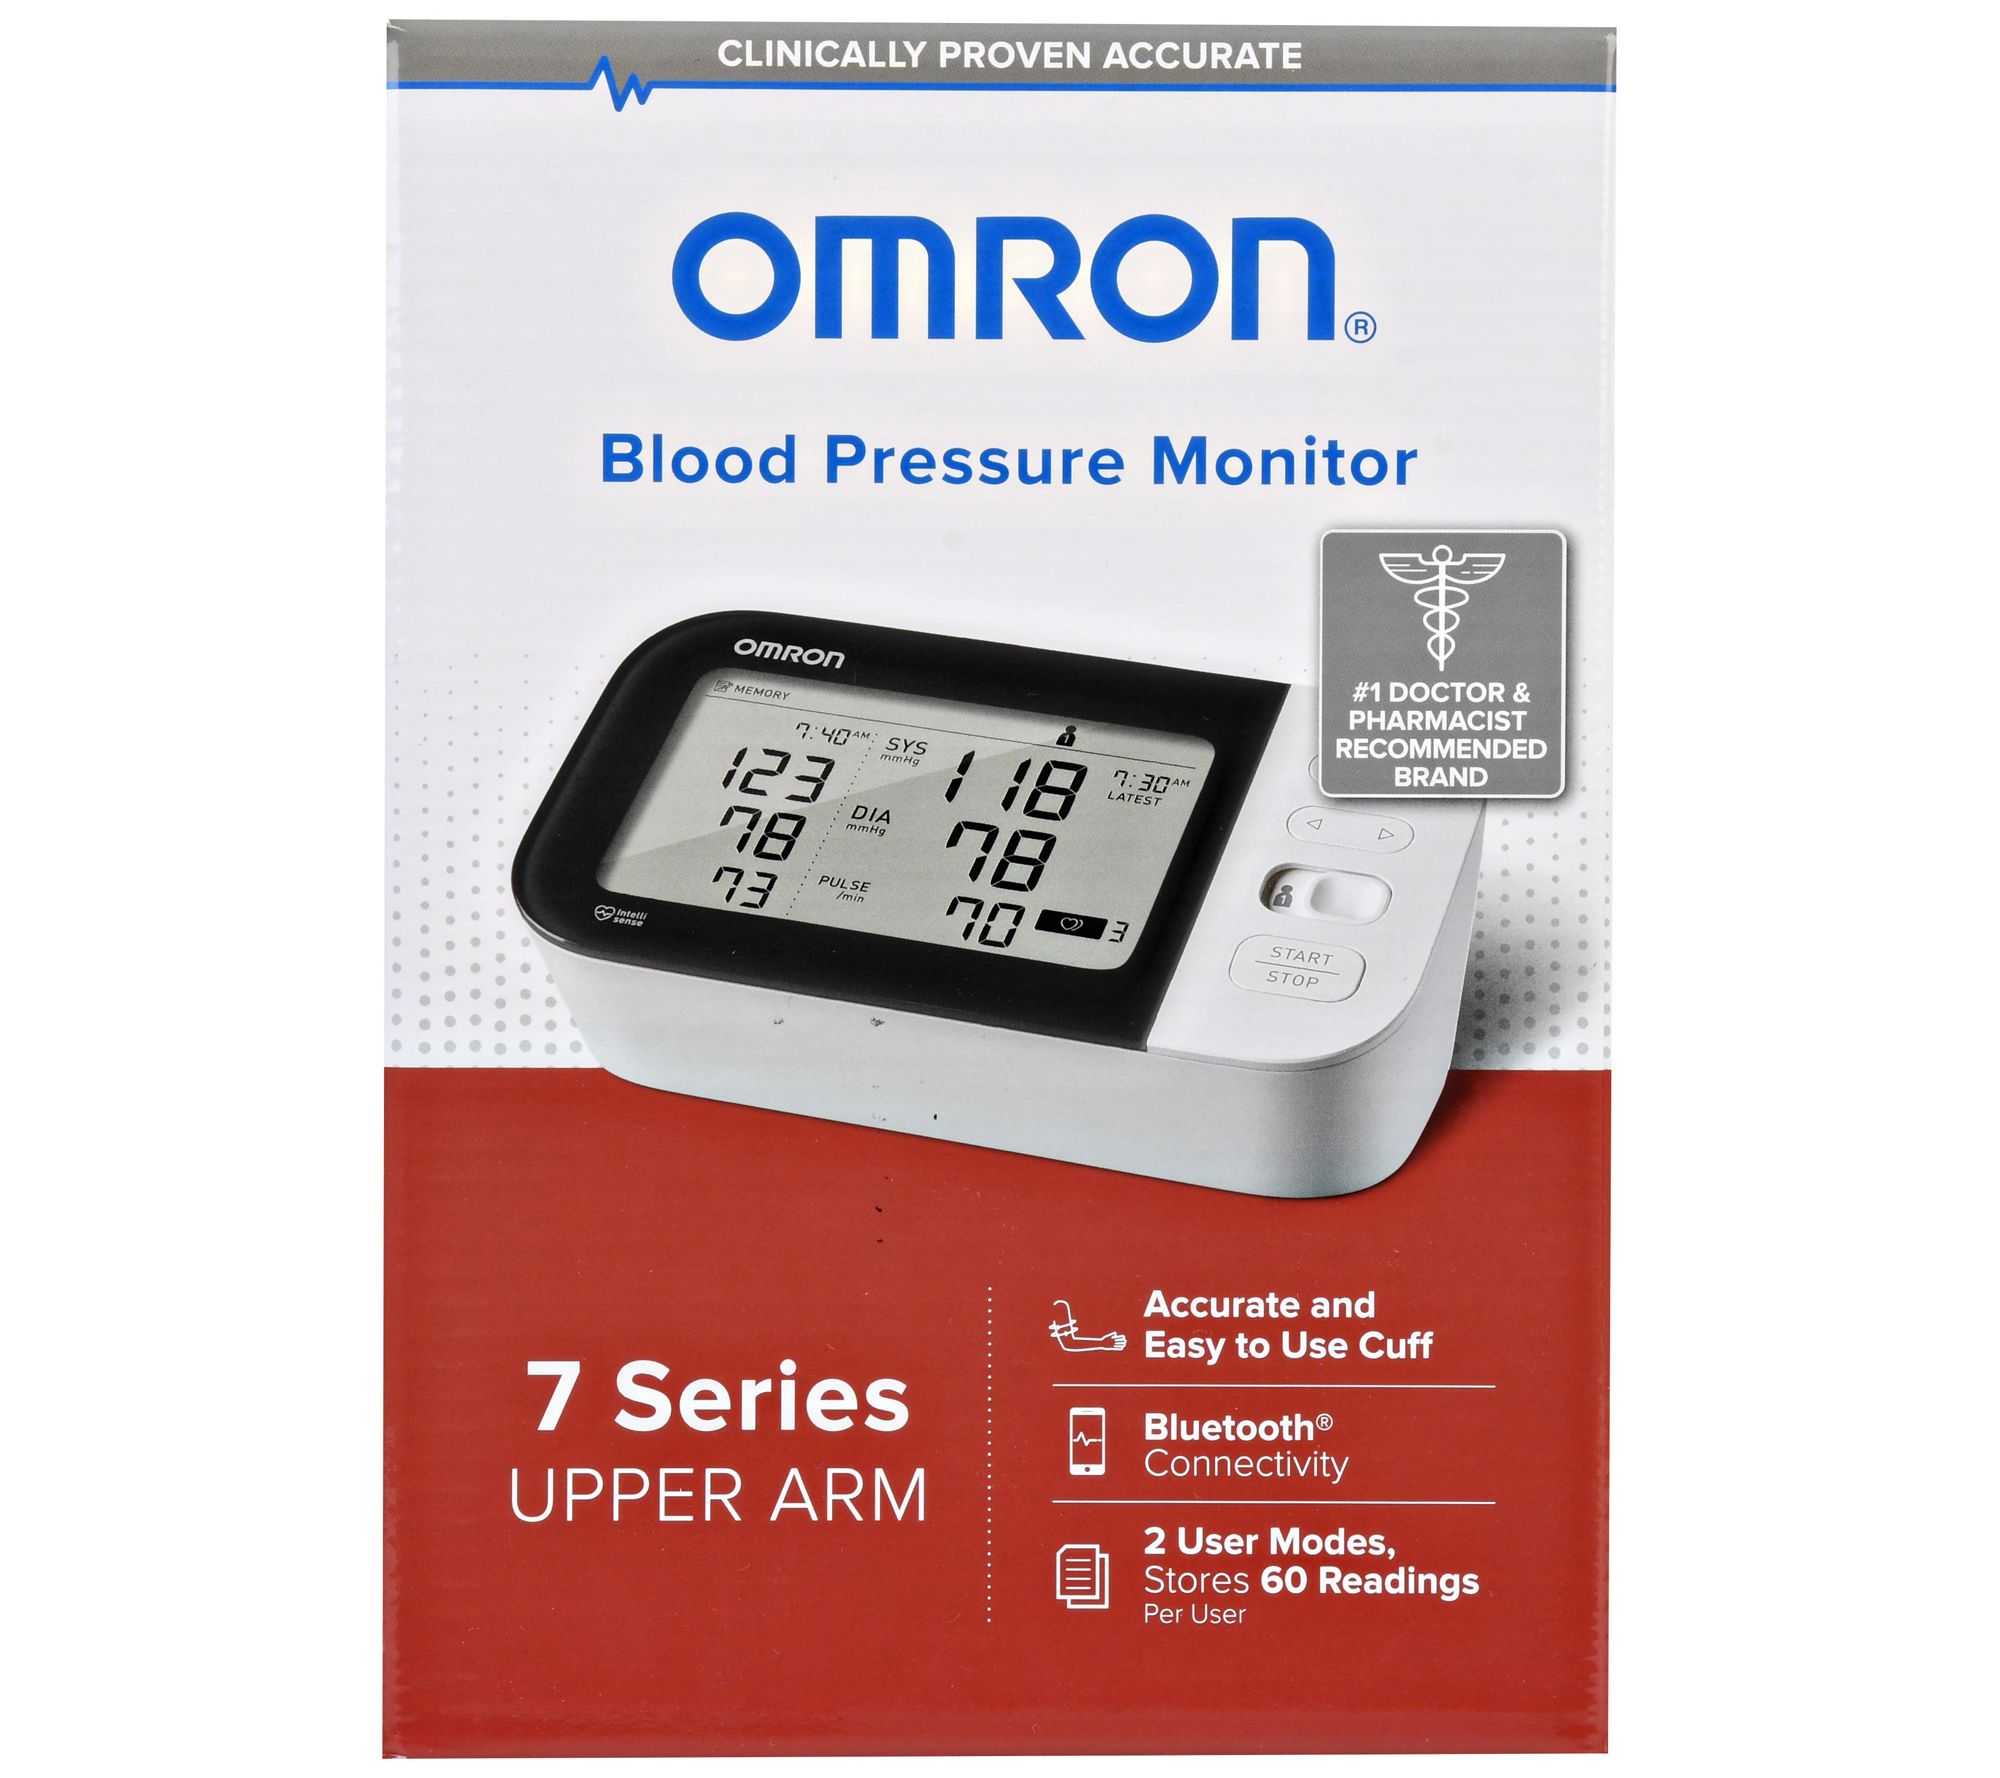 Omron Platinum Blood Pressure Monitor Reliability - China Video of